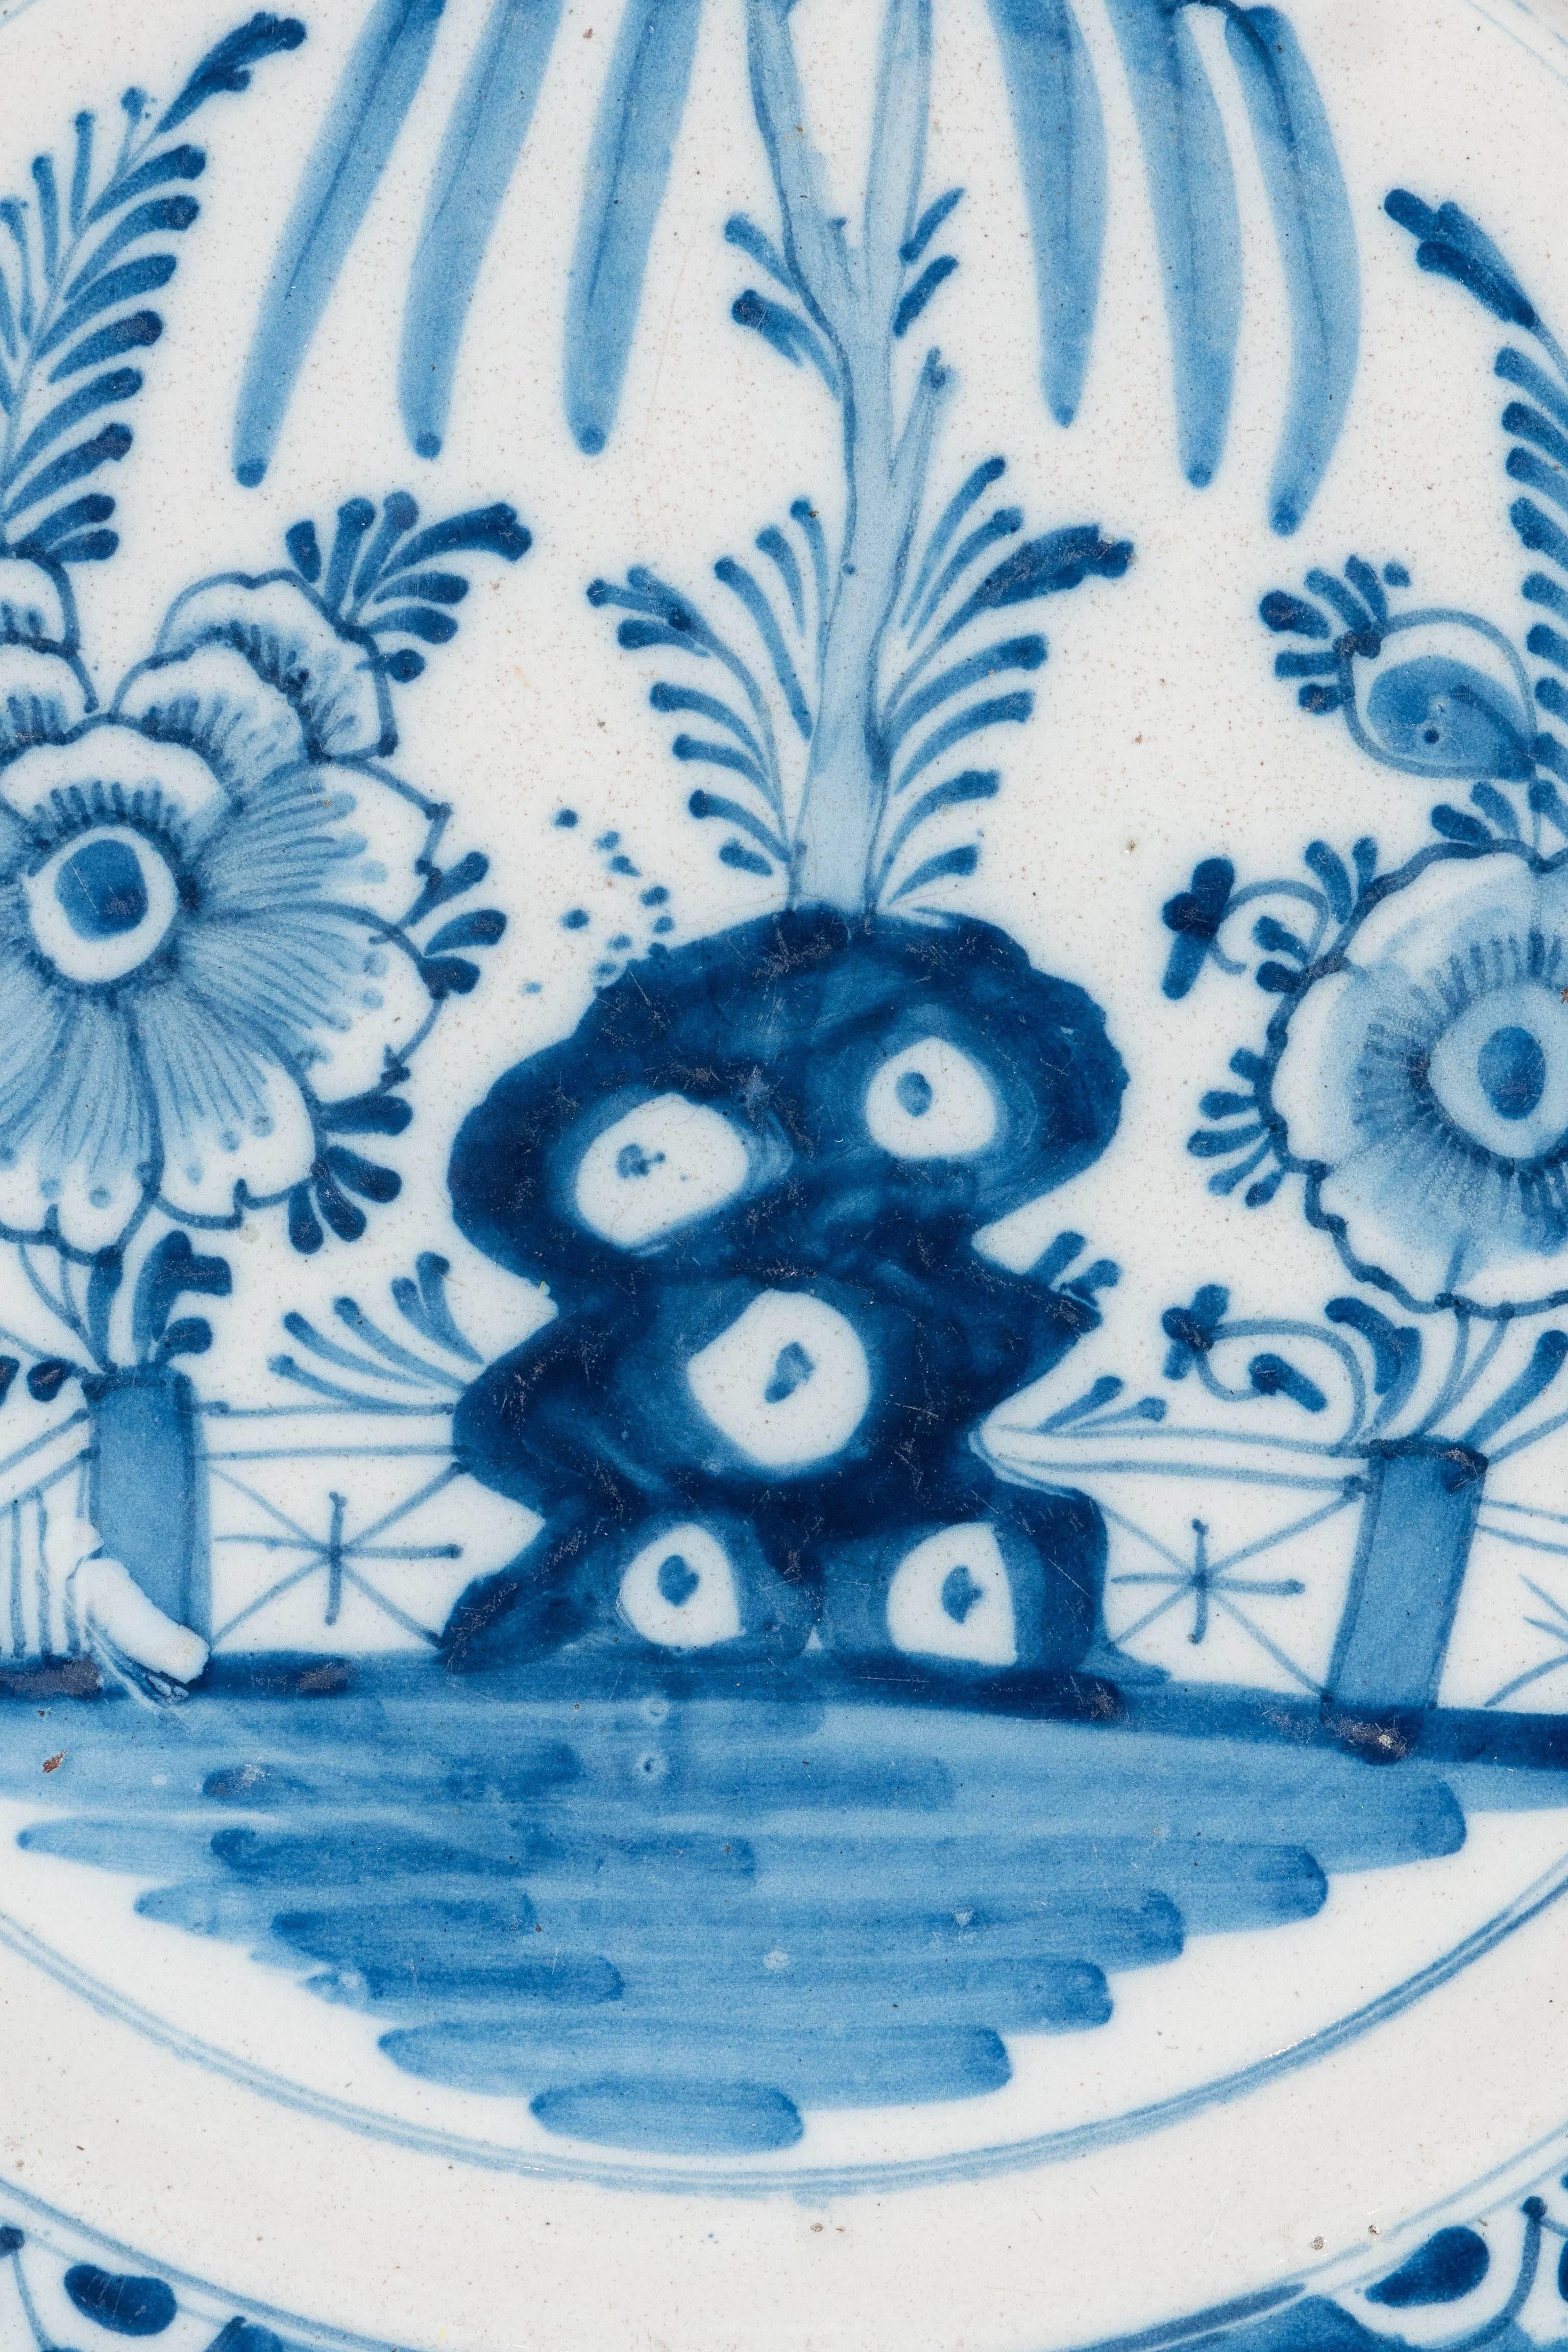 We are pleased to offer this pair of Blue and White Delft chargers hand=painted with a naive garden scene. The oversize flowers and the taihu rock are seen in front of the garden fence. The cobalt blue border is decorated with flower heads painted